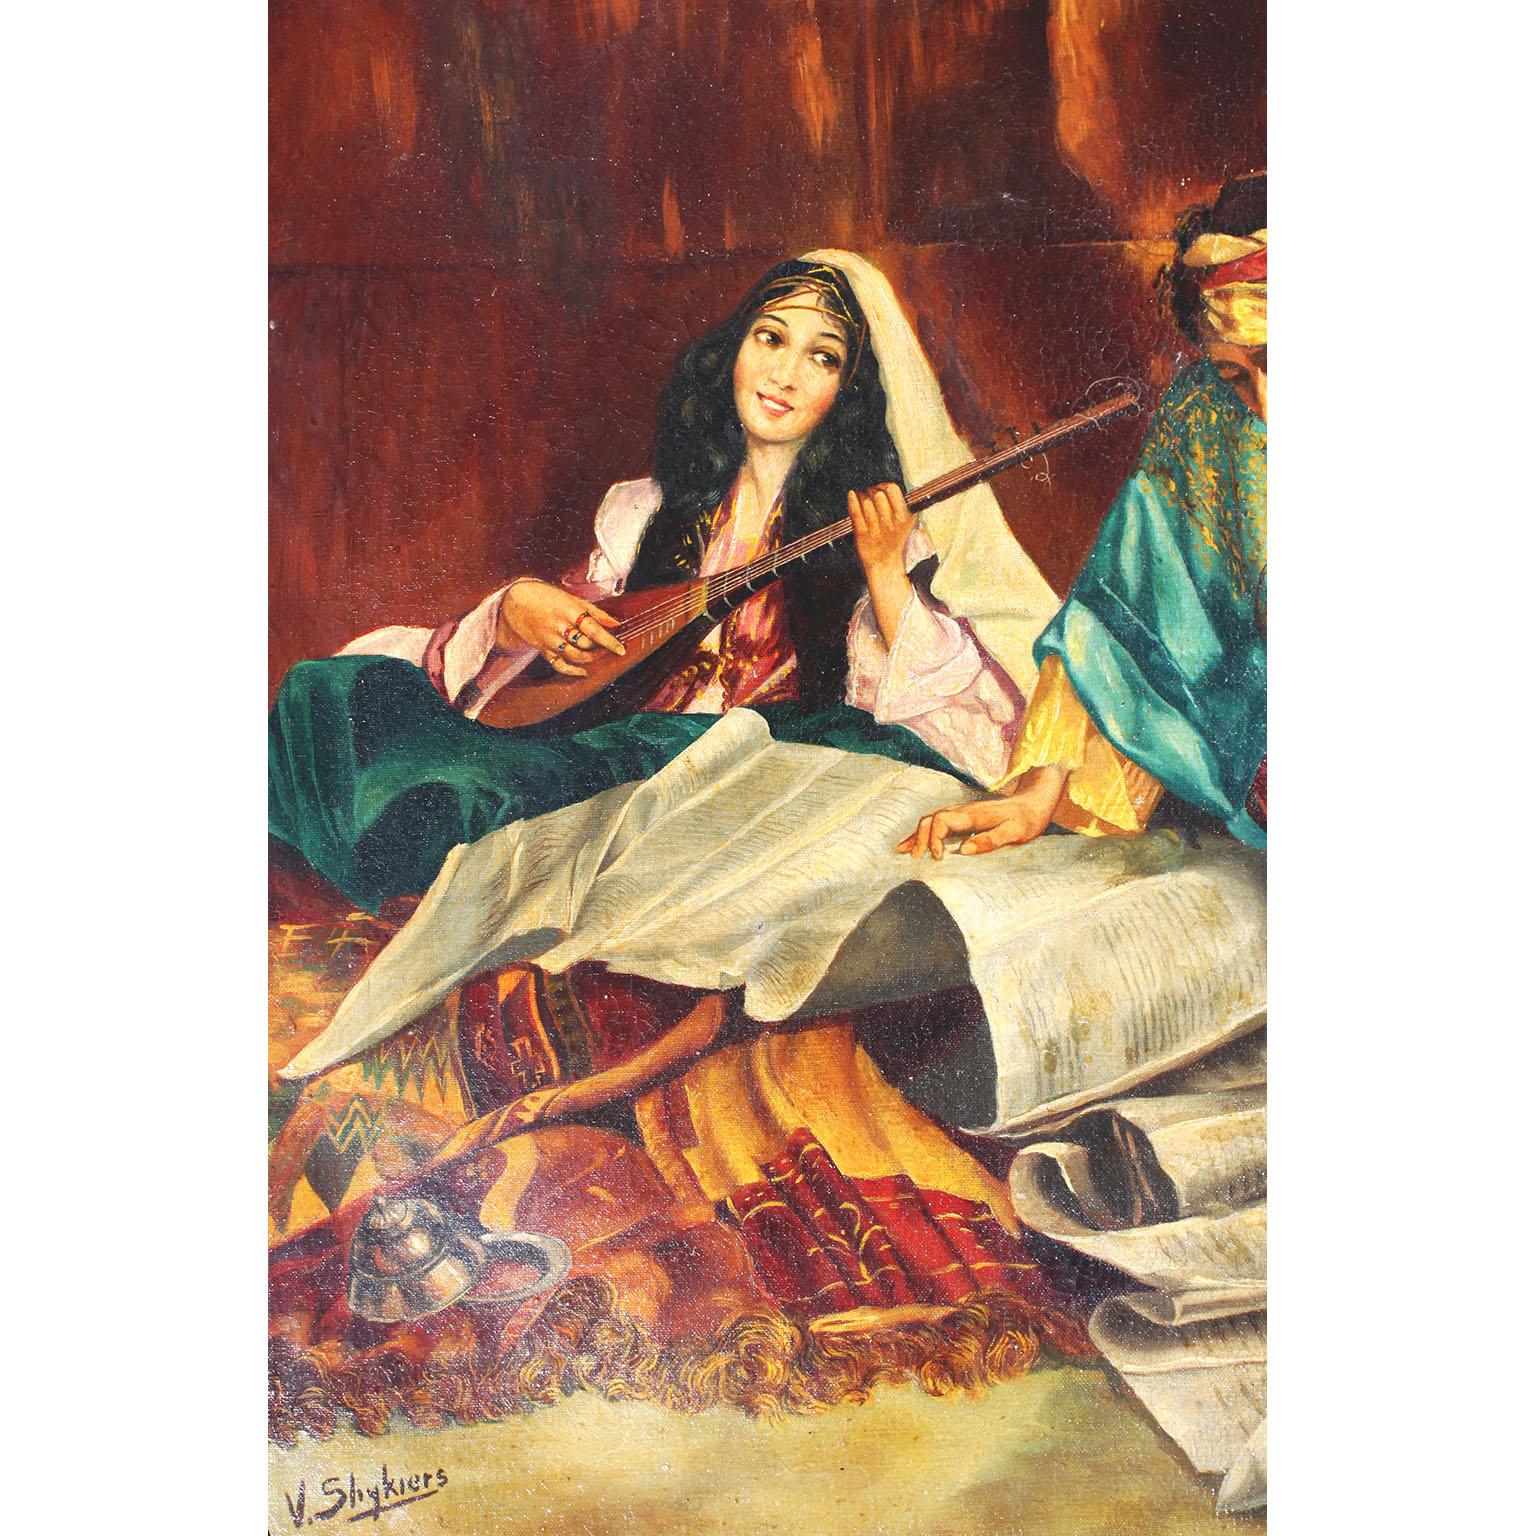 Spanish Early 20th Century Orientalist Oil on Canvas Titled 'The Master's Favorite' For Sale